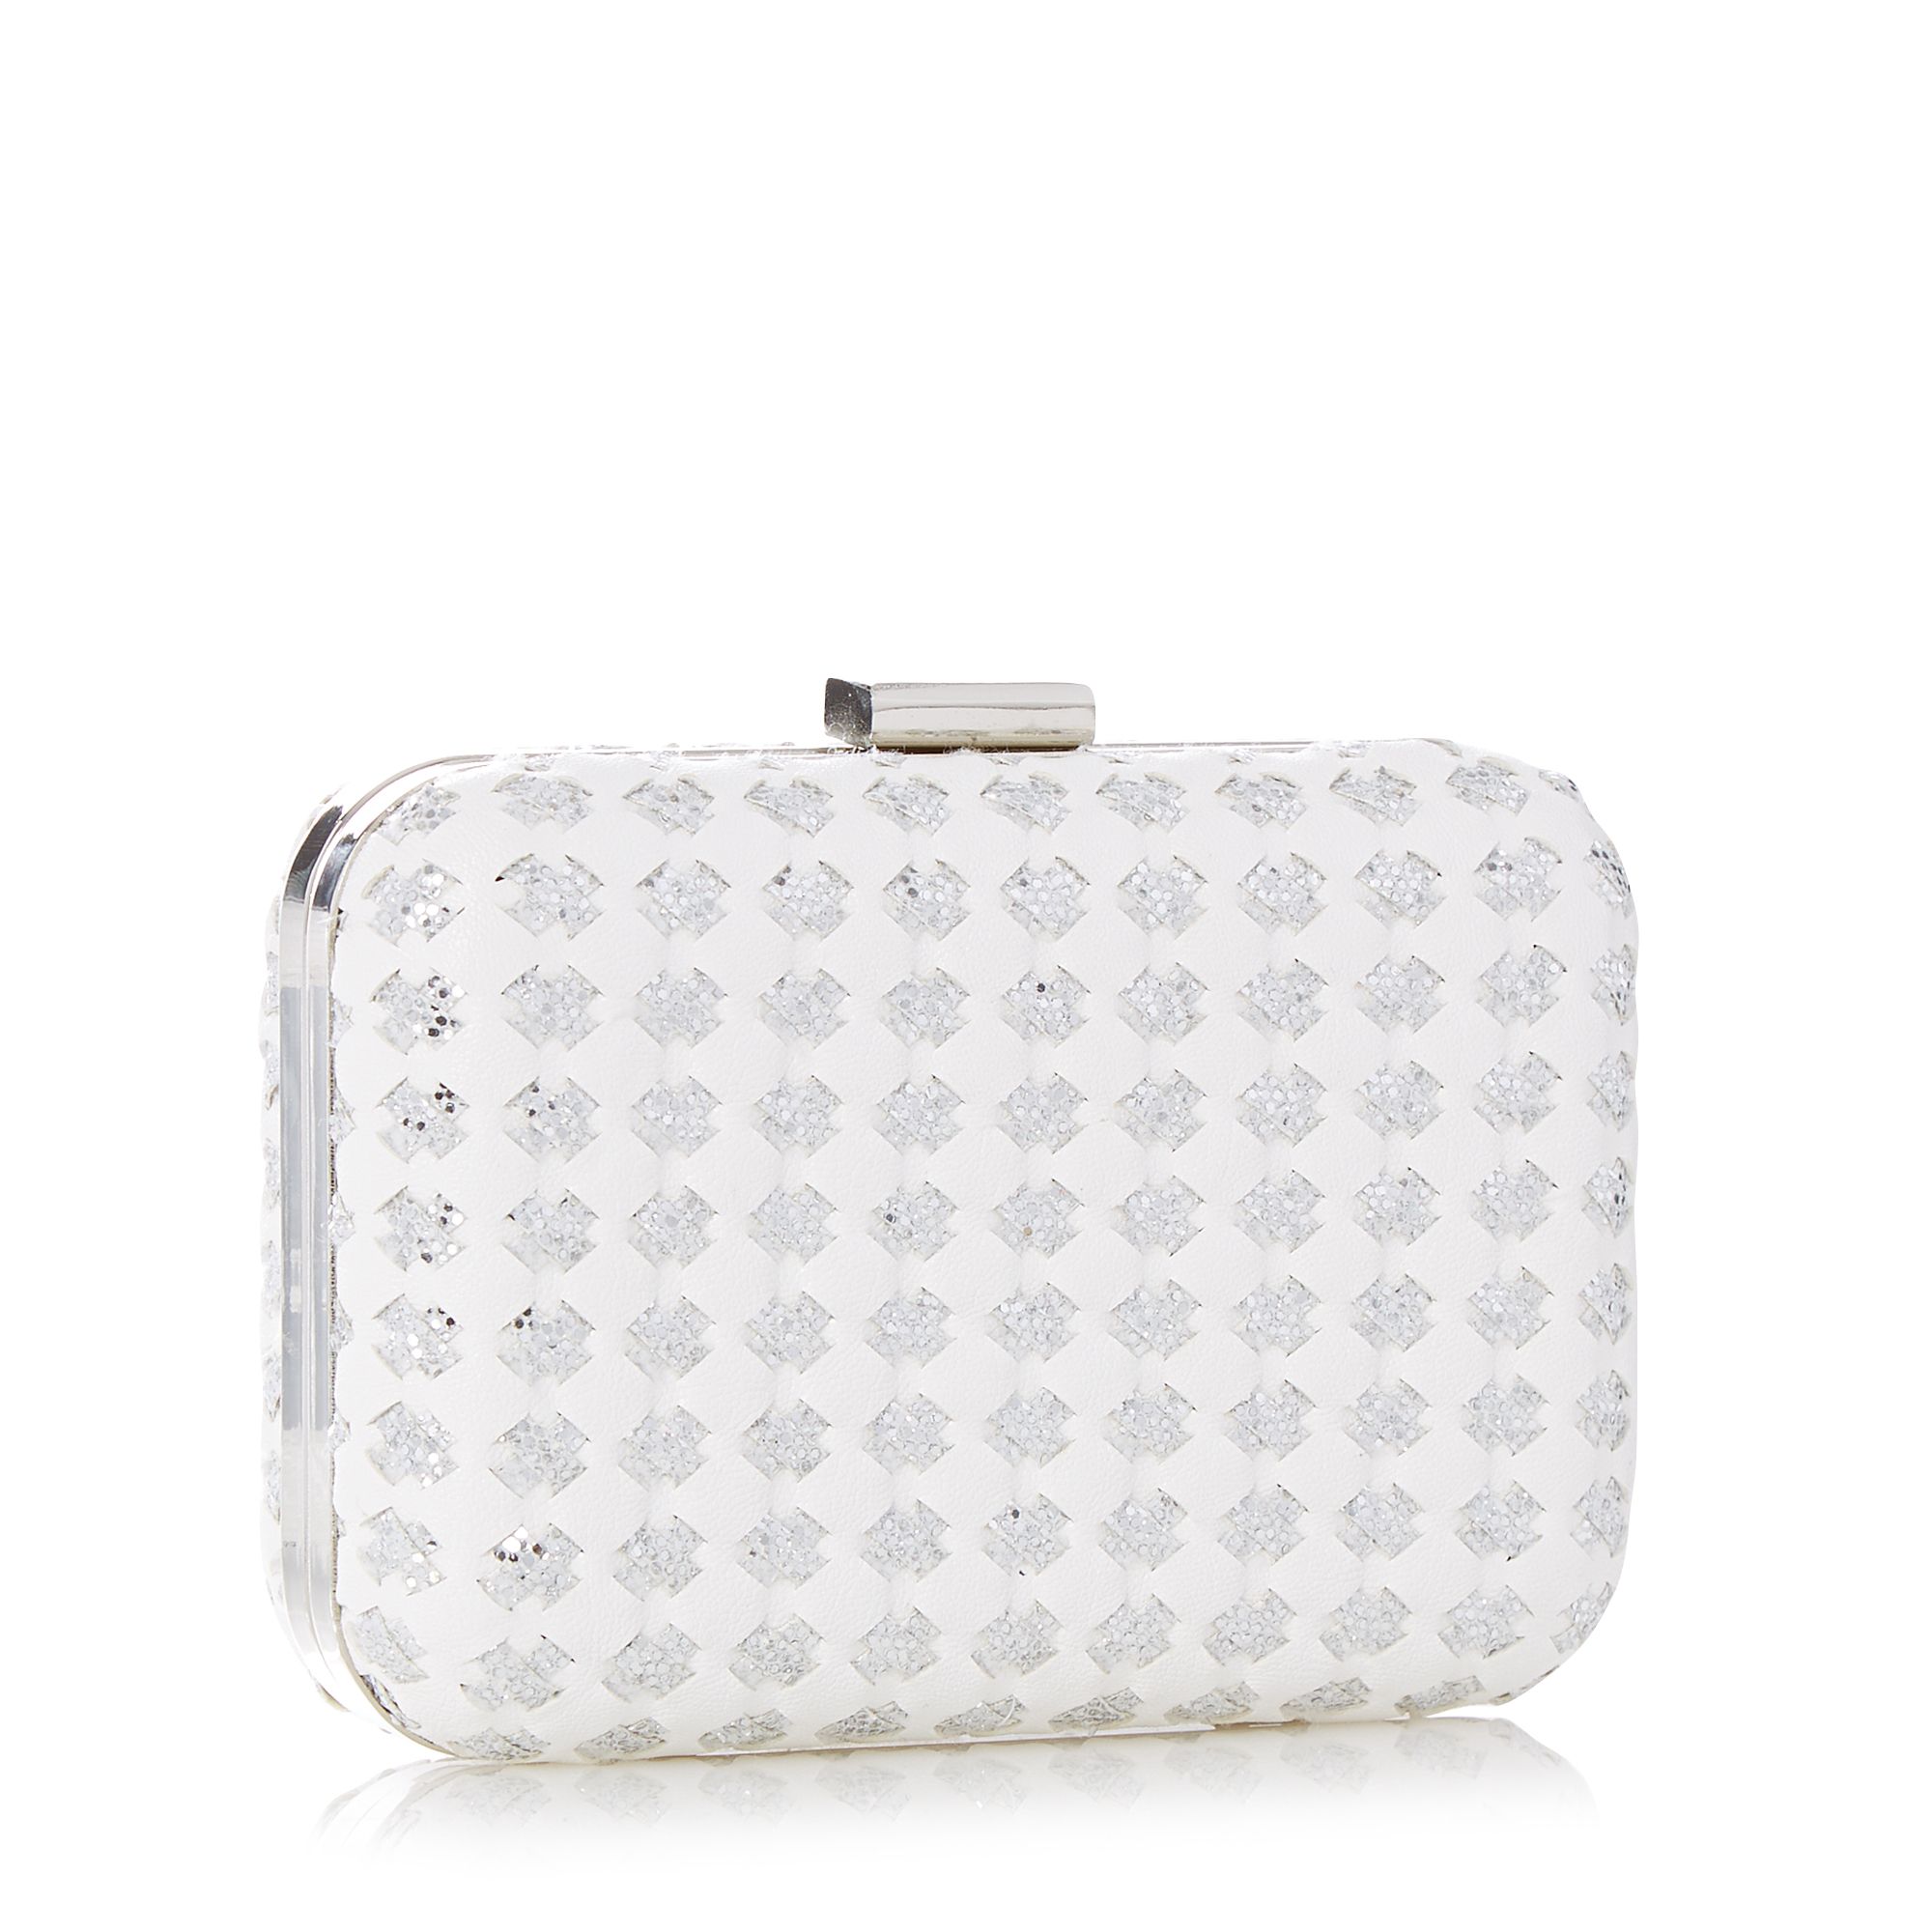 Floozie By Frost French Womens White Woven Glitter Clutch Bag From Debenhams | eBay